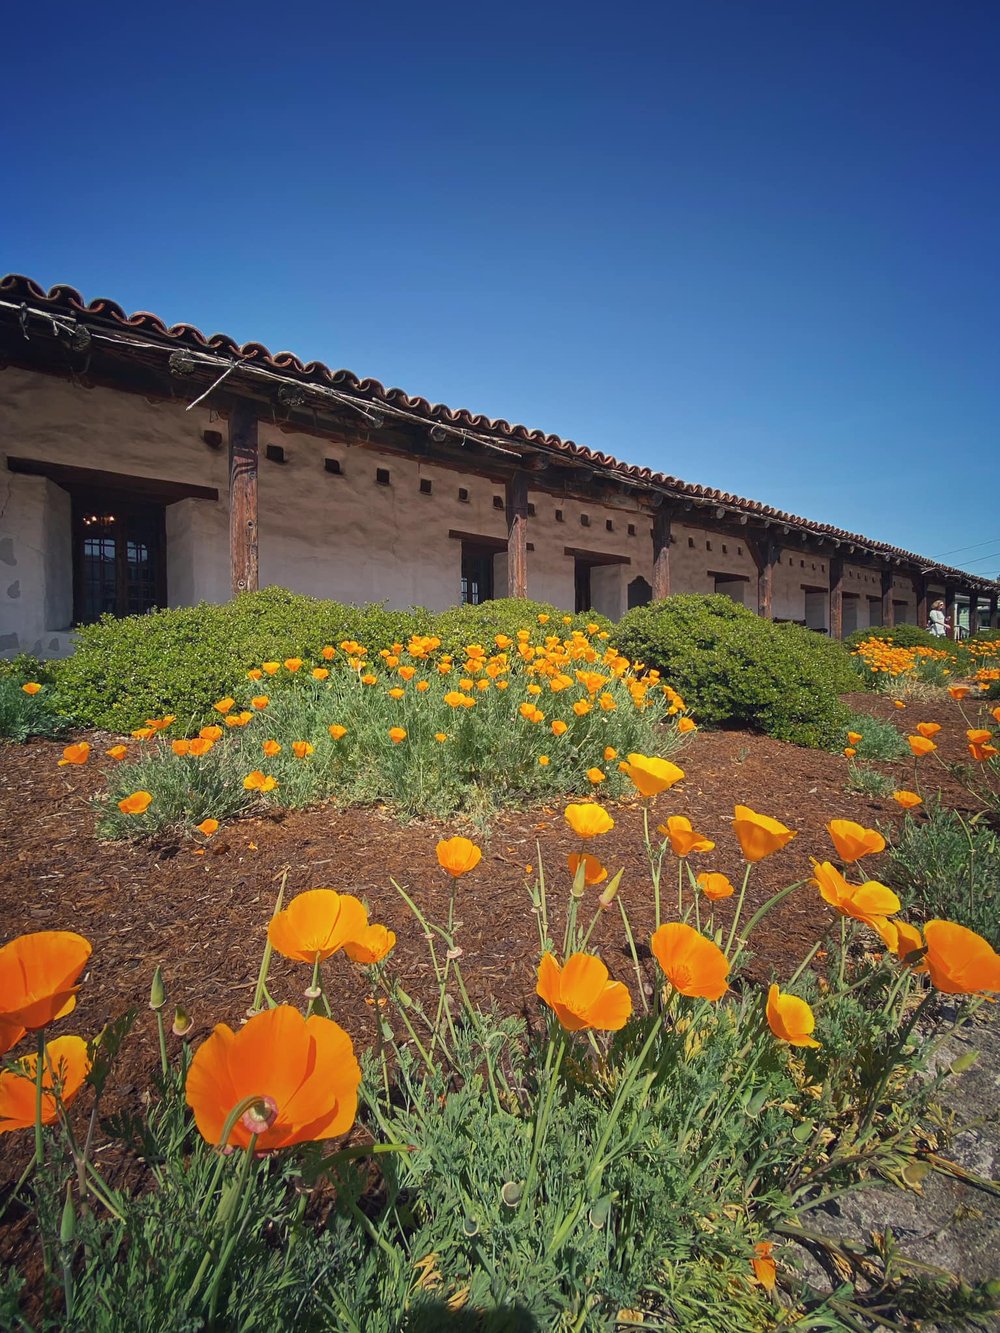  The Sonoma Mission, last and most northerly, and also the only one established in Alta California under Mexican rule. Plus a riot of California poppies. 